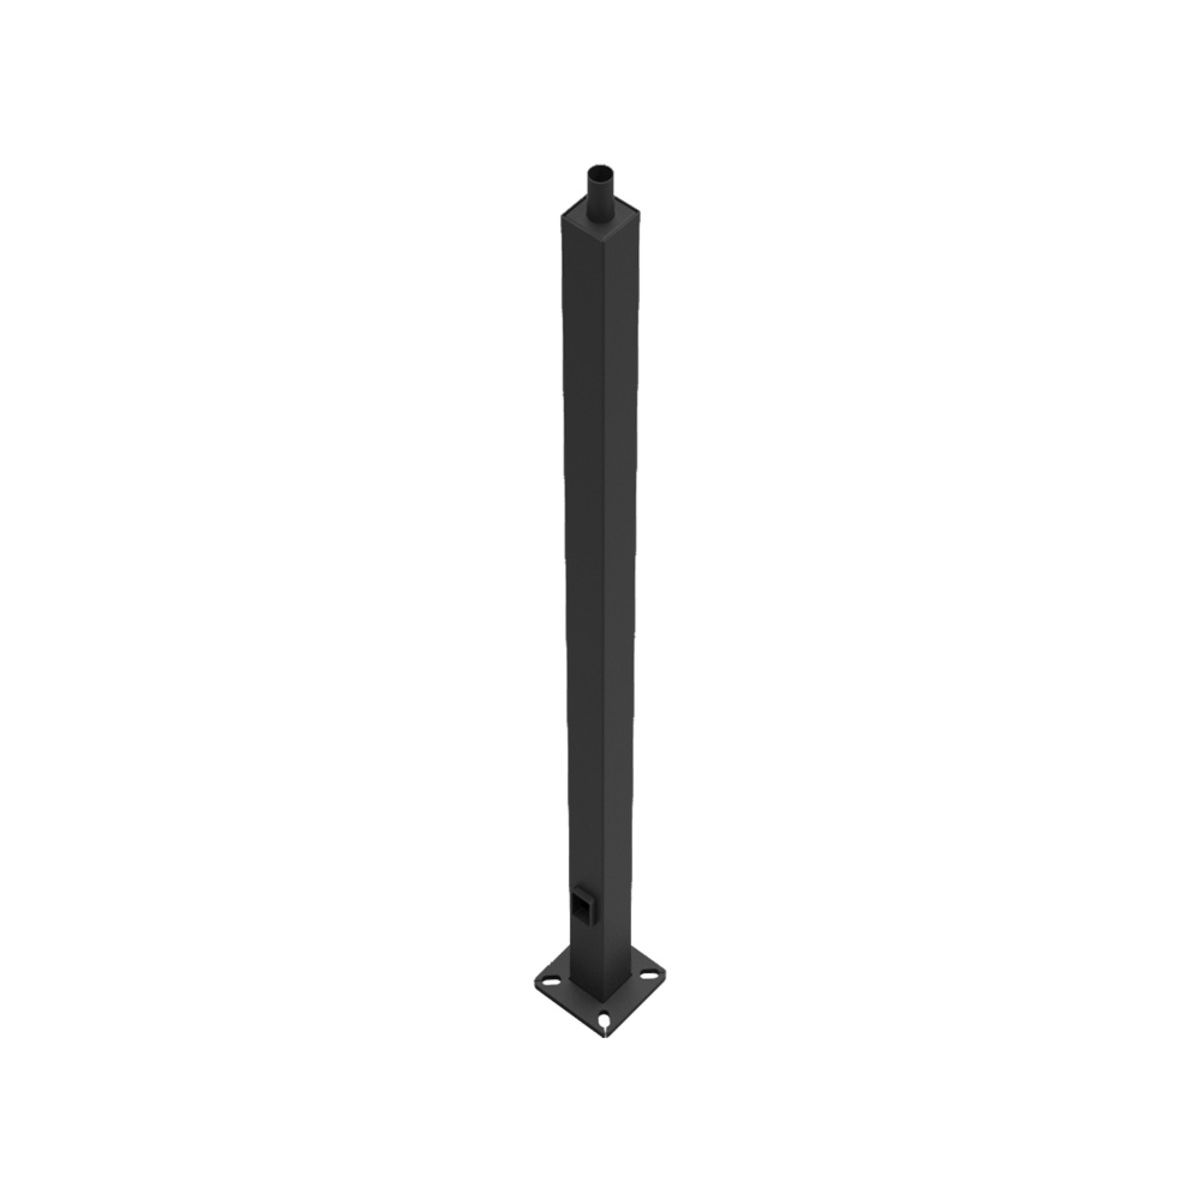 30 Ft Square Steel Tenon Top Pole 4 In. Shaft 7 Gauge